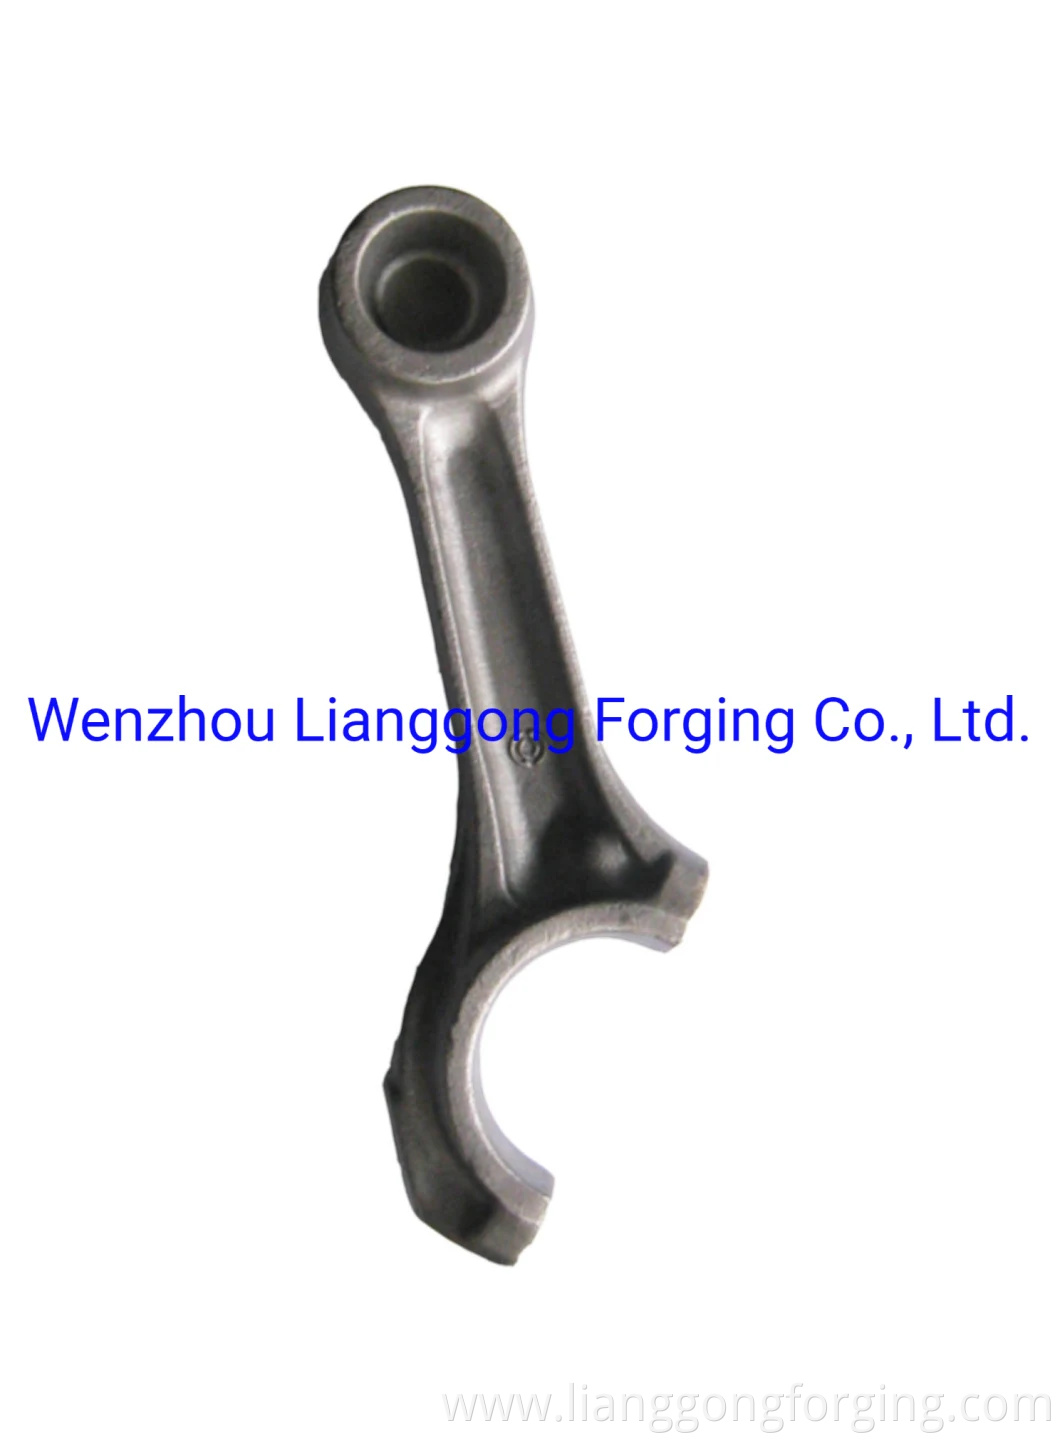 Forged Engine Connecting Rod Used in Automobile